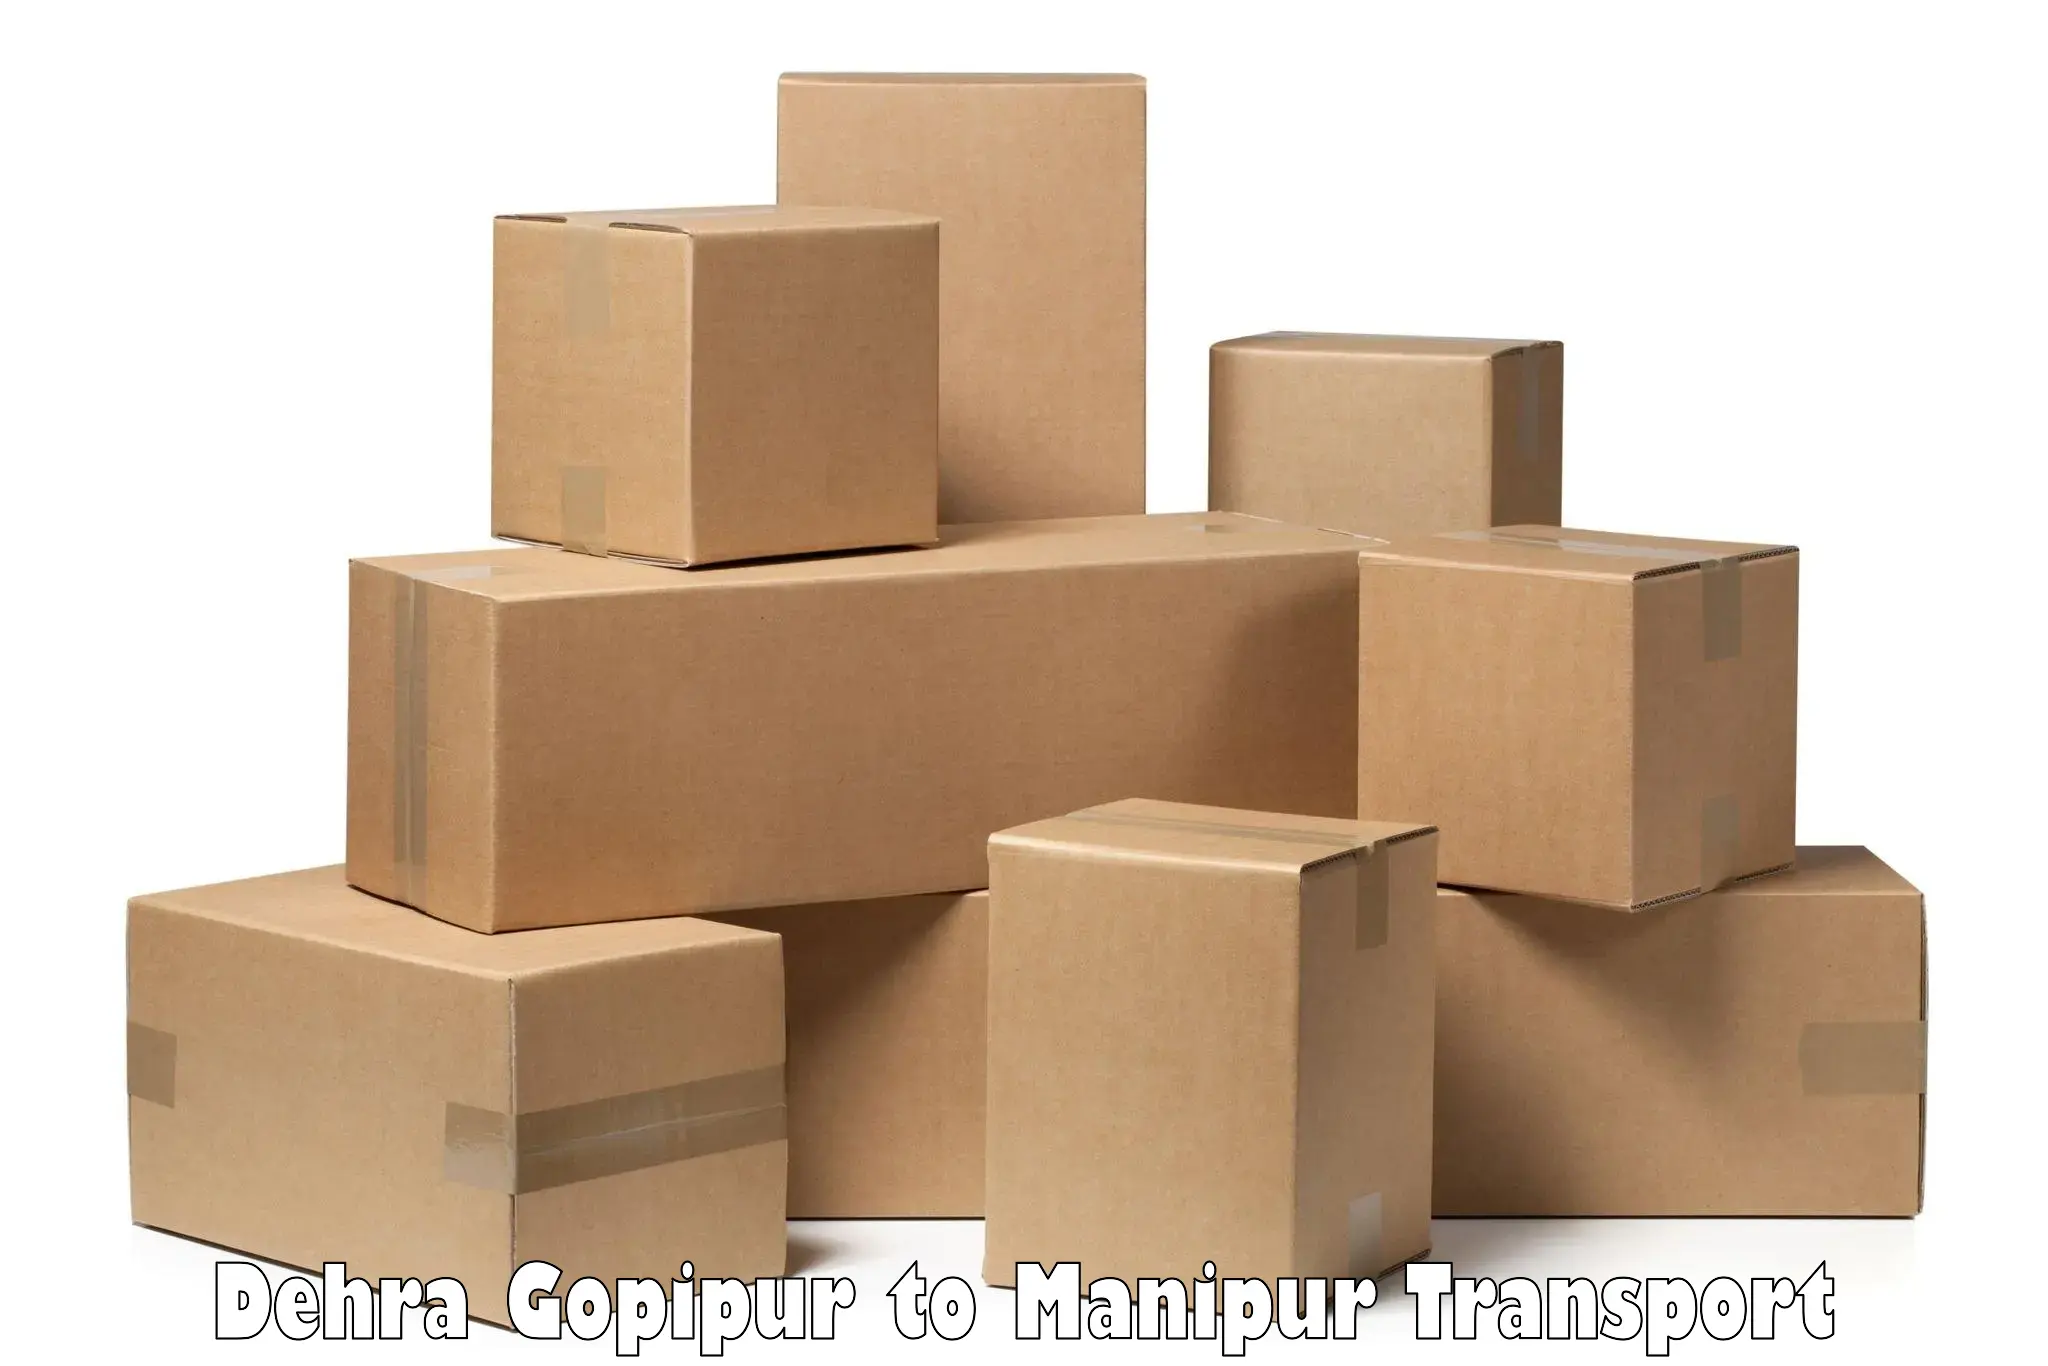 Container transport service Dehra Gopipur to Imphal